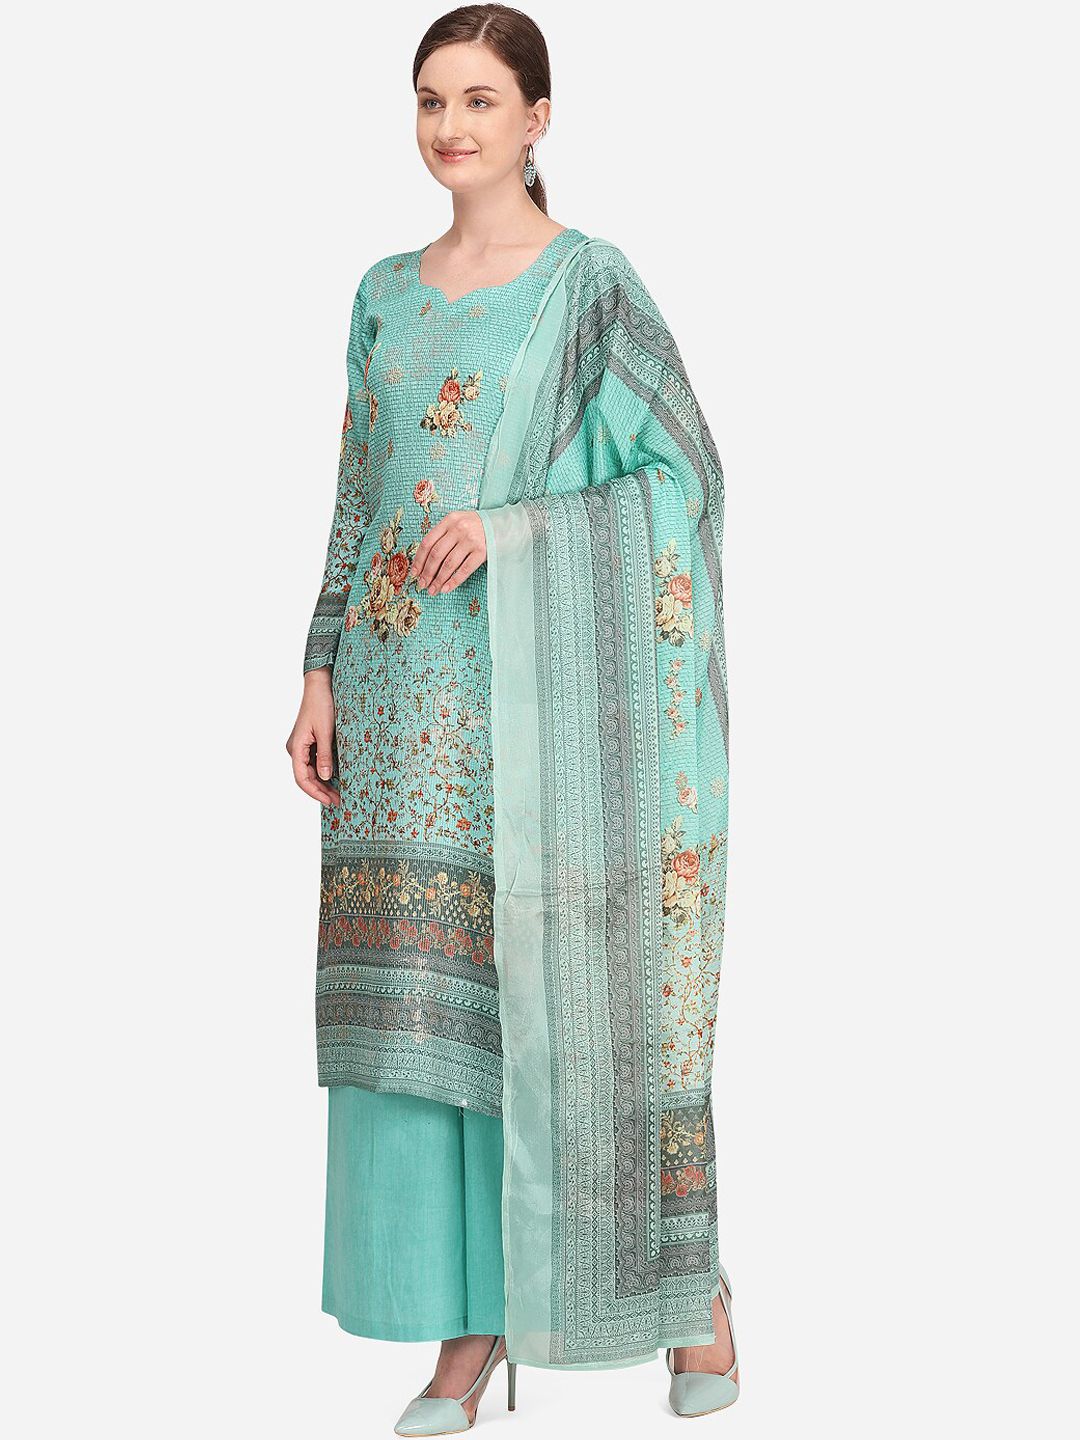 Stylee LIFESTYLE Women Turquoise Blue & Black Printed Unstitched Dress Material Price in India